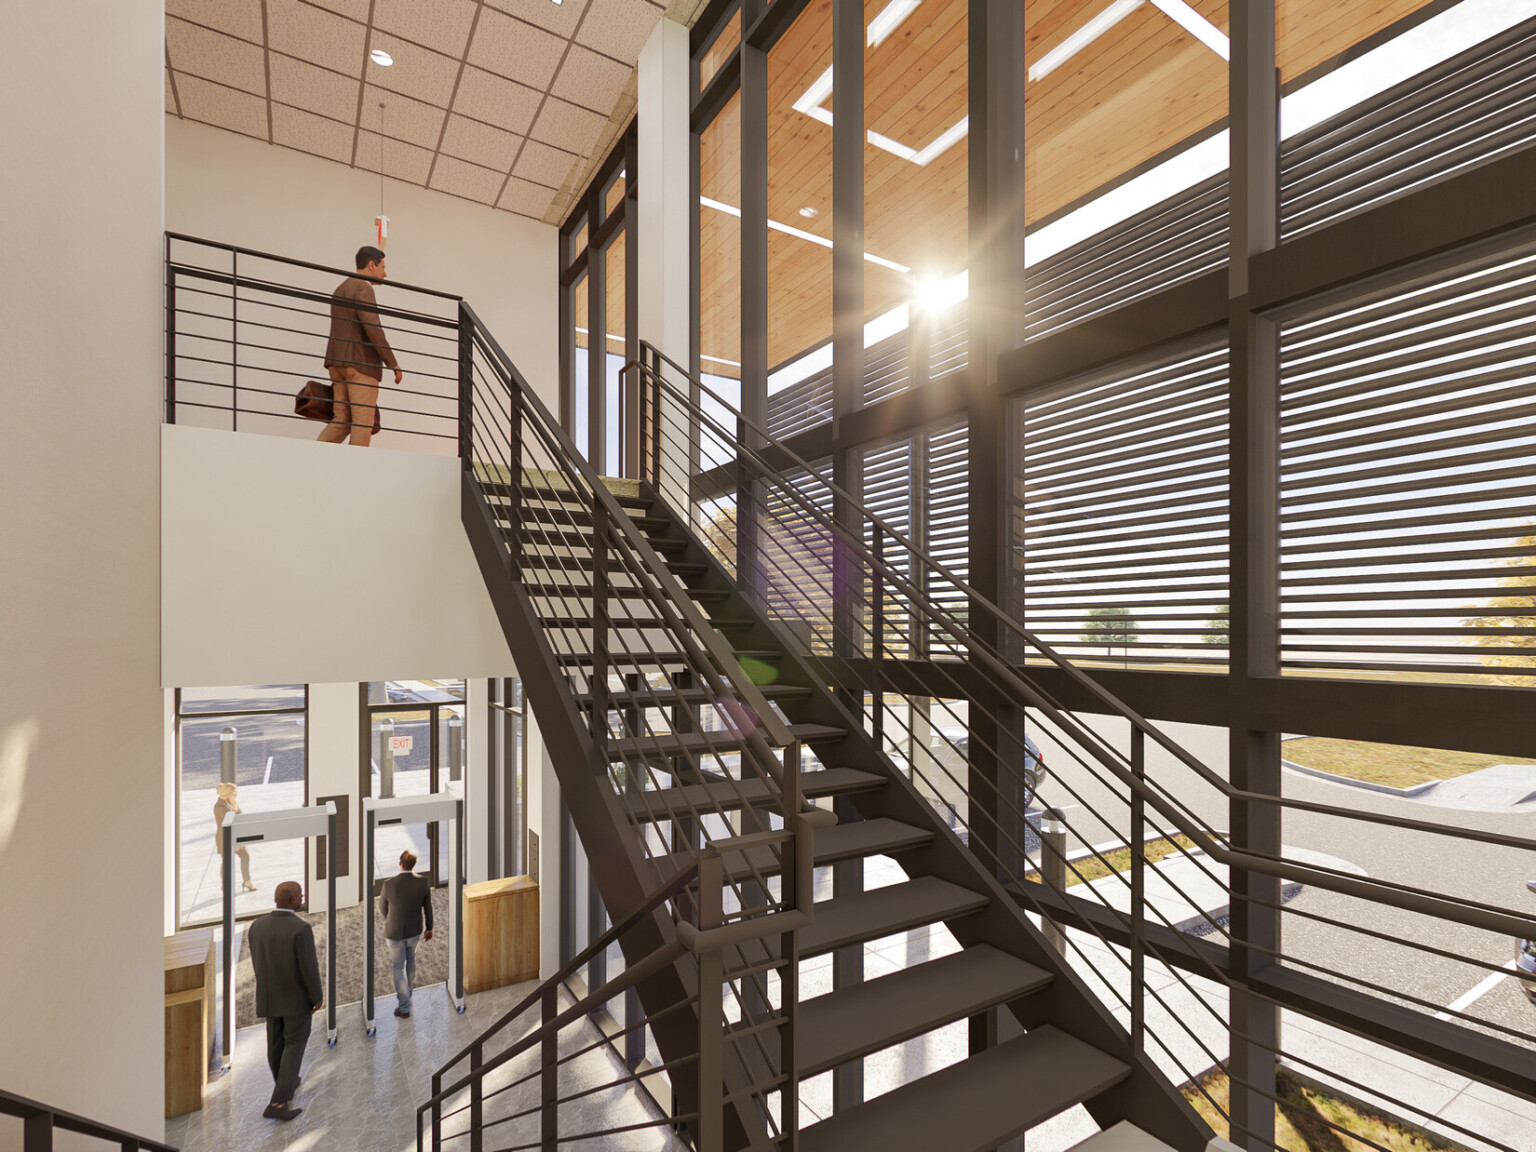 Yavapai County Criminal Justice Center interior with modern staircase and natural light